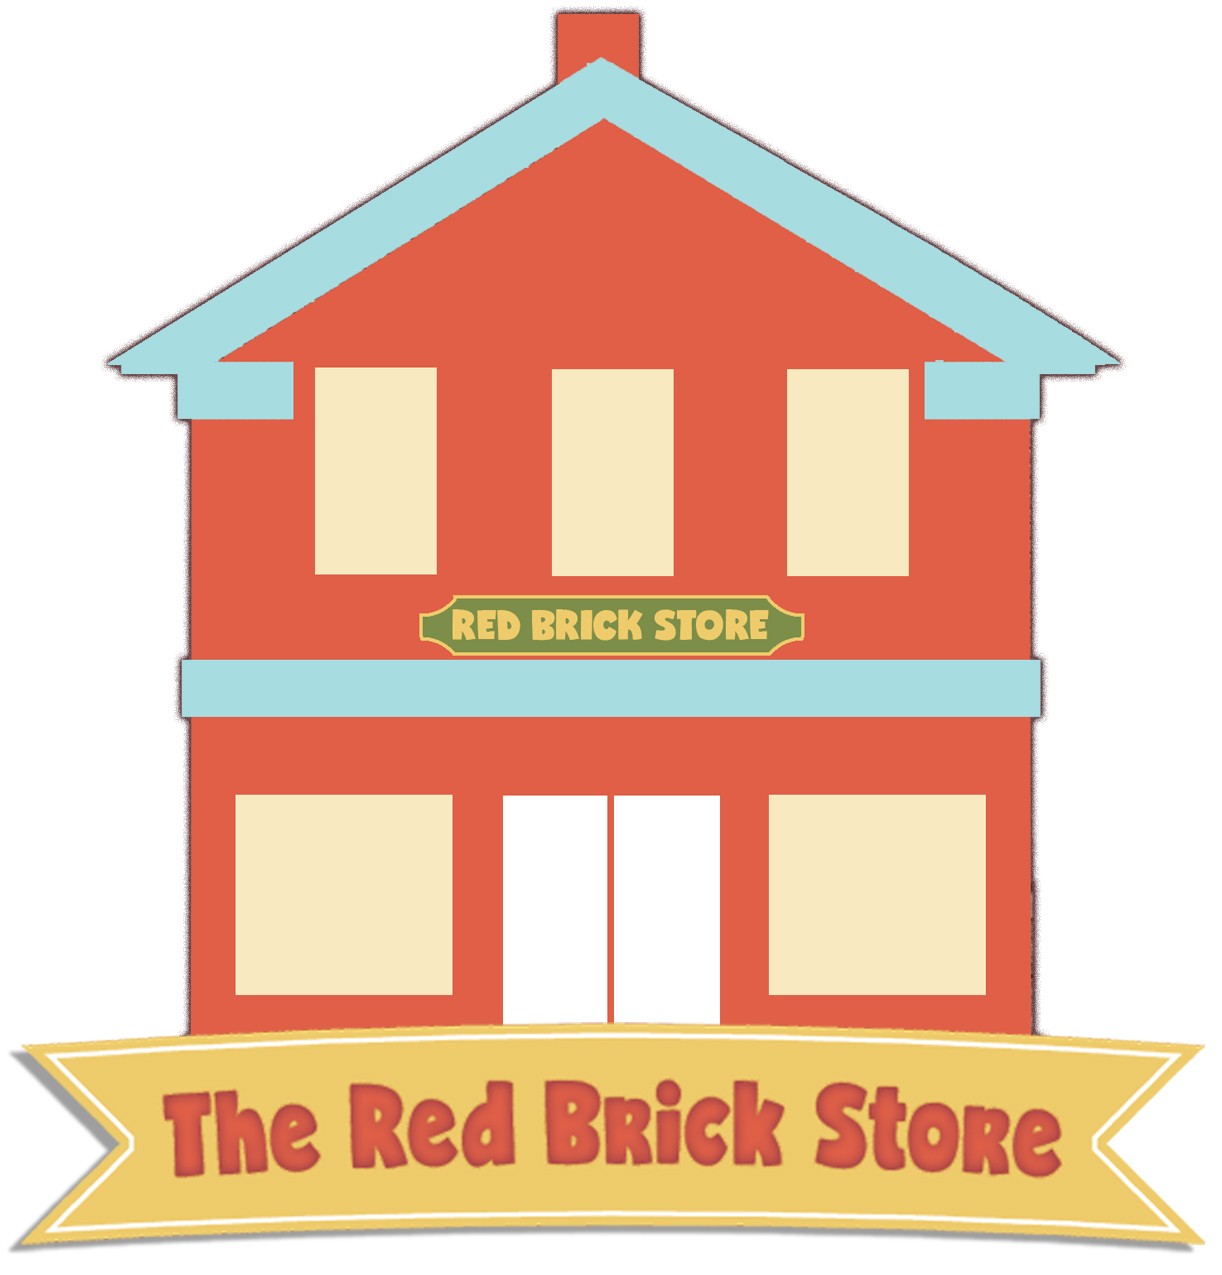 The Red Brick Store